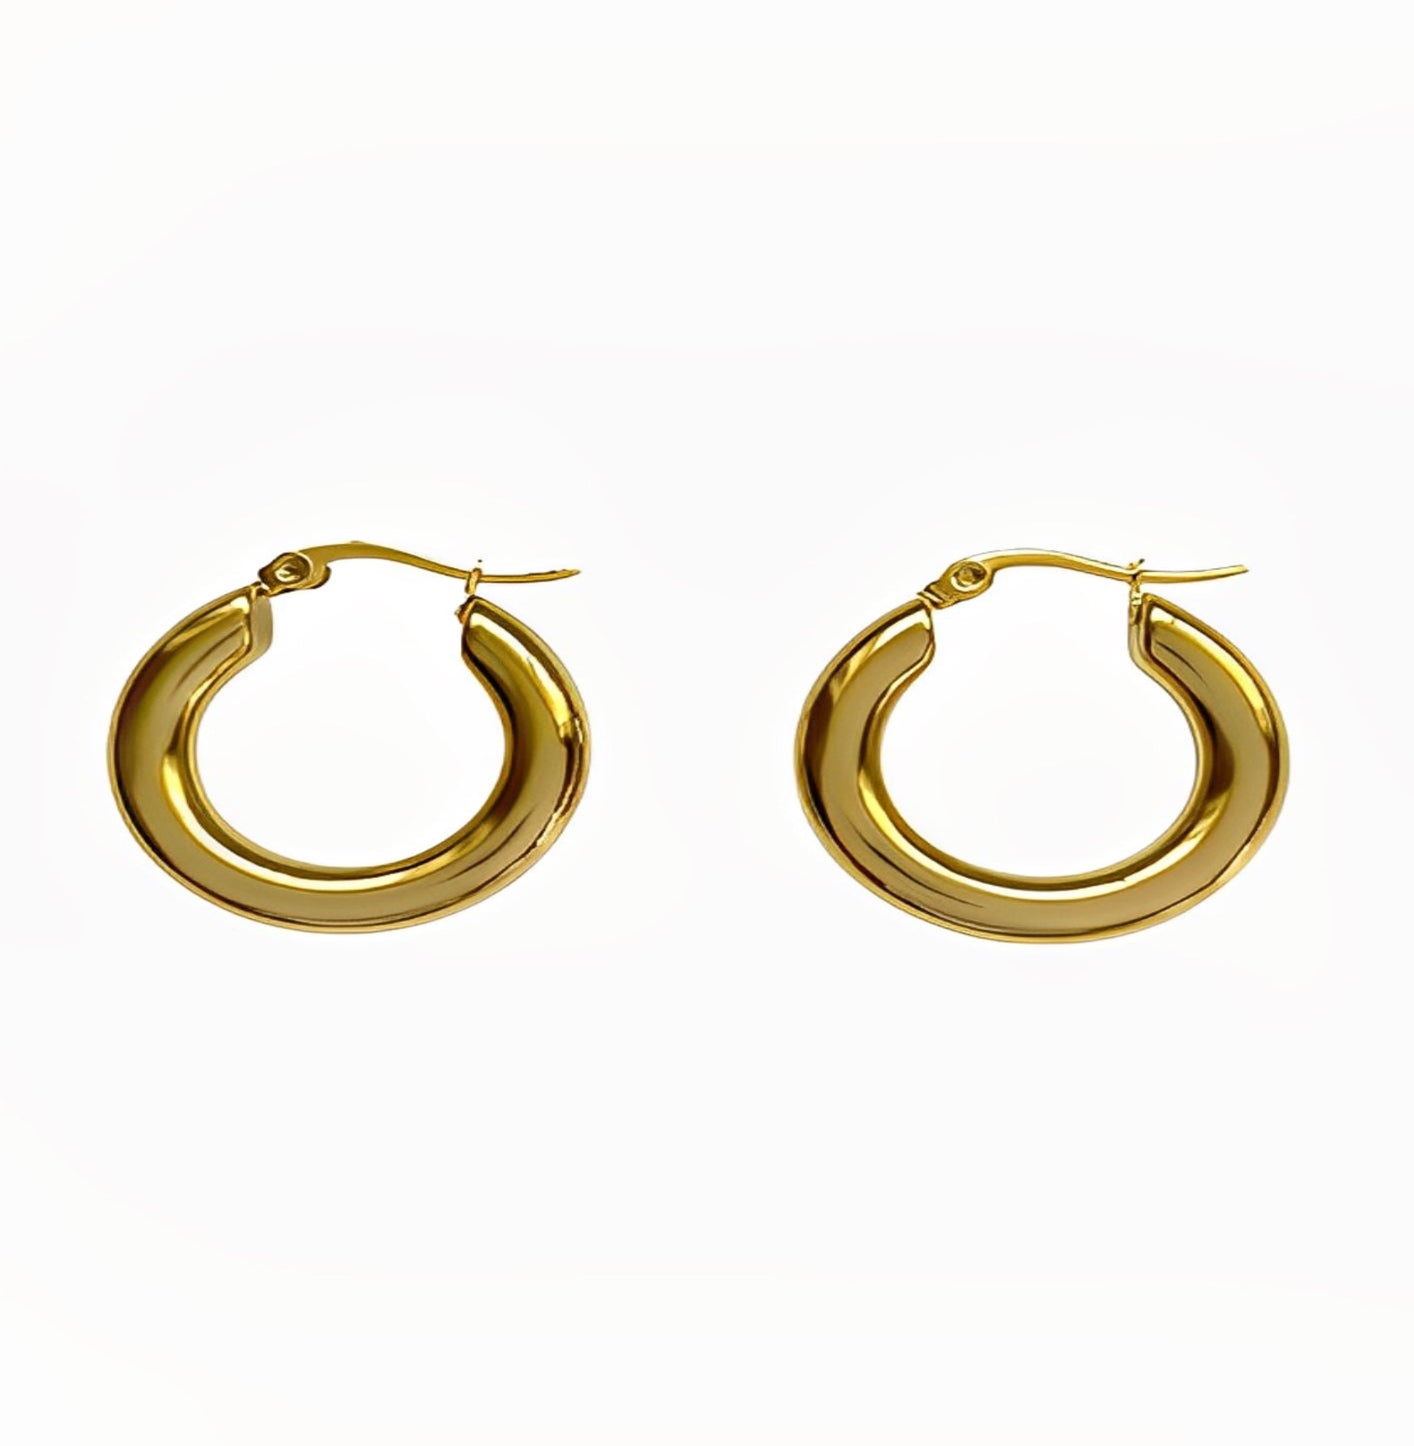 SMALL HOOP EARRING earing Yubama Jewelry Online Store - The Elegant Designs of Gold and Silver ! 